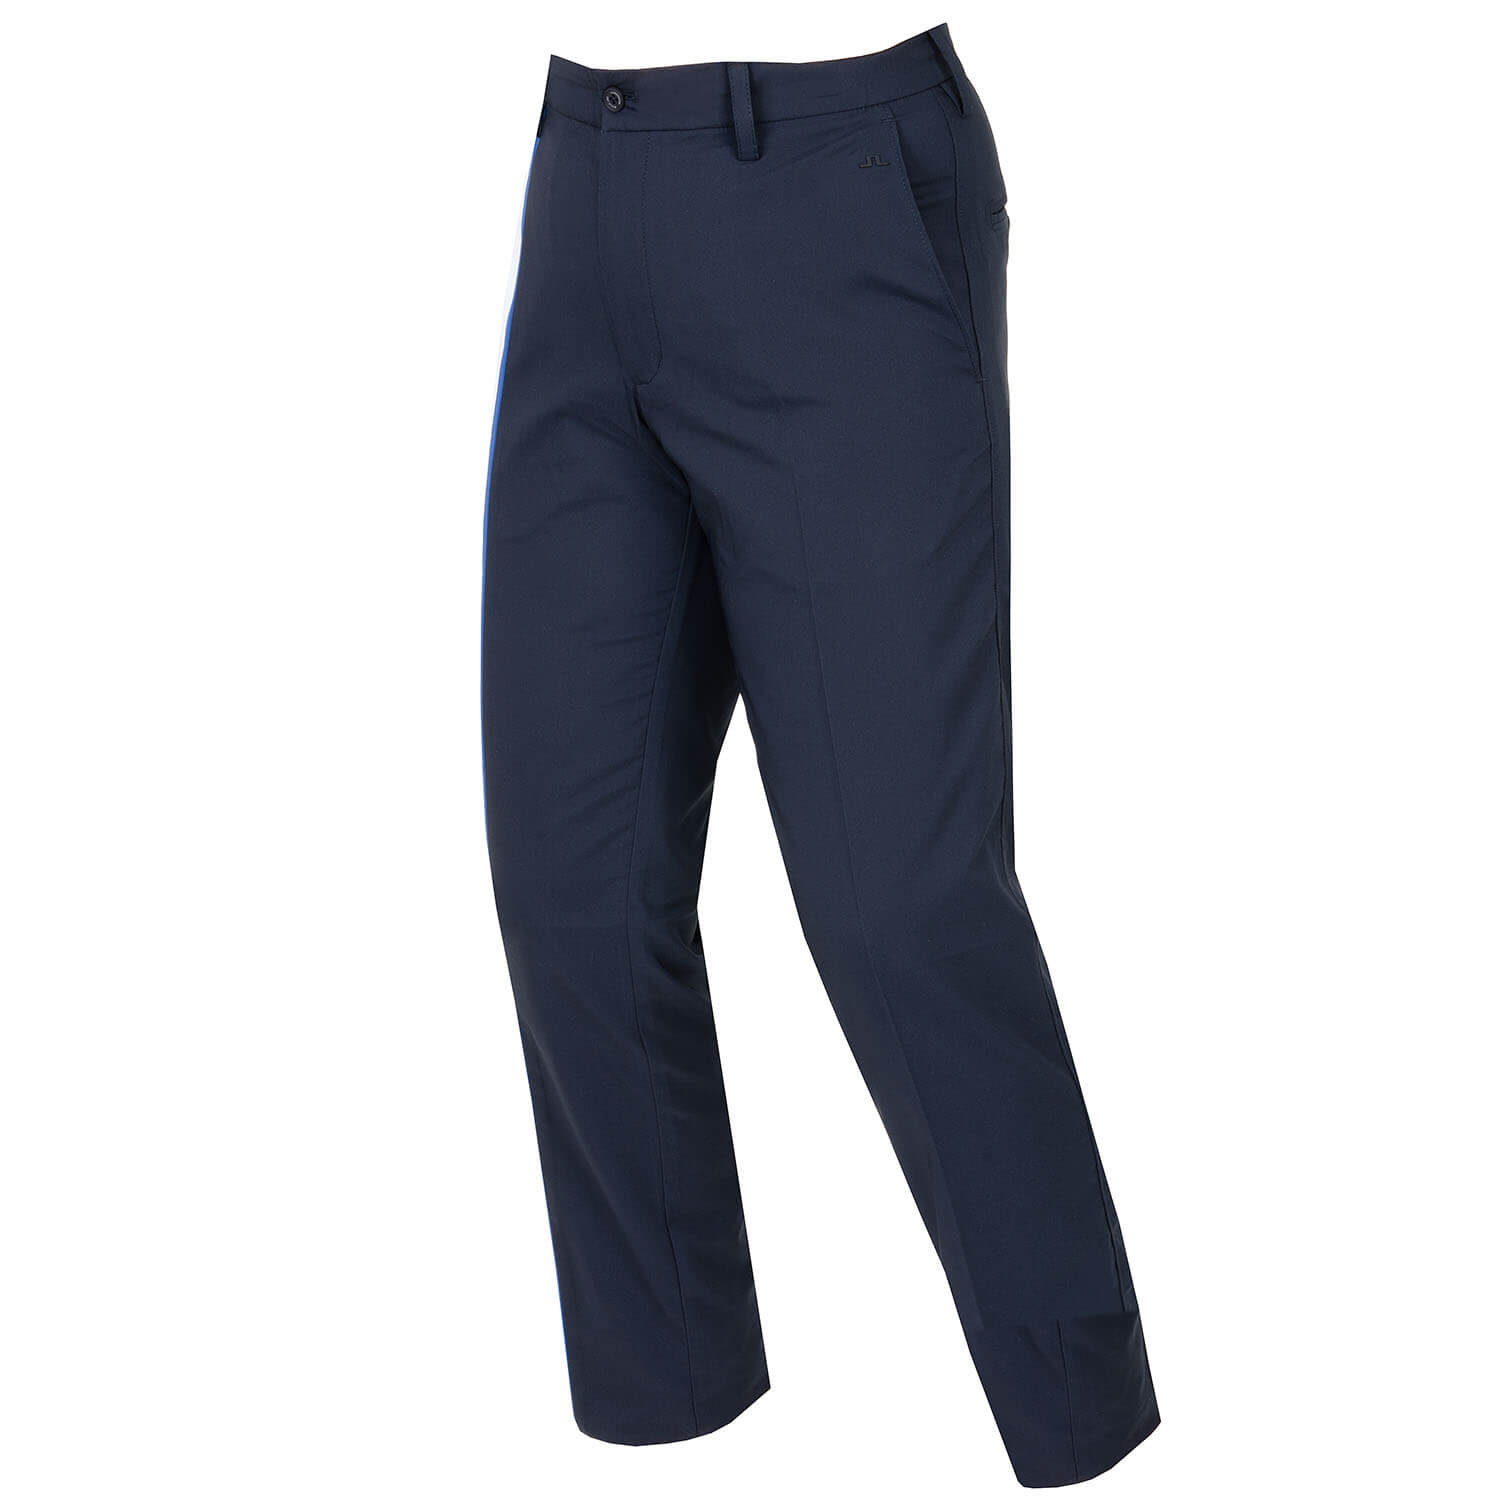 J Lindeberg Patcher Trousers